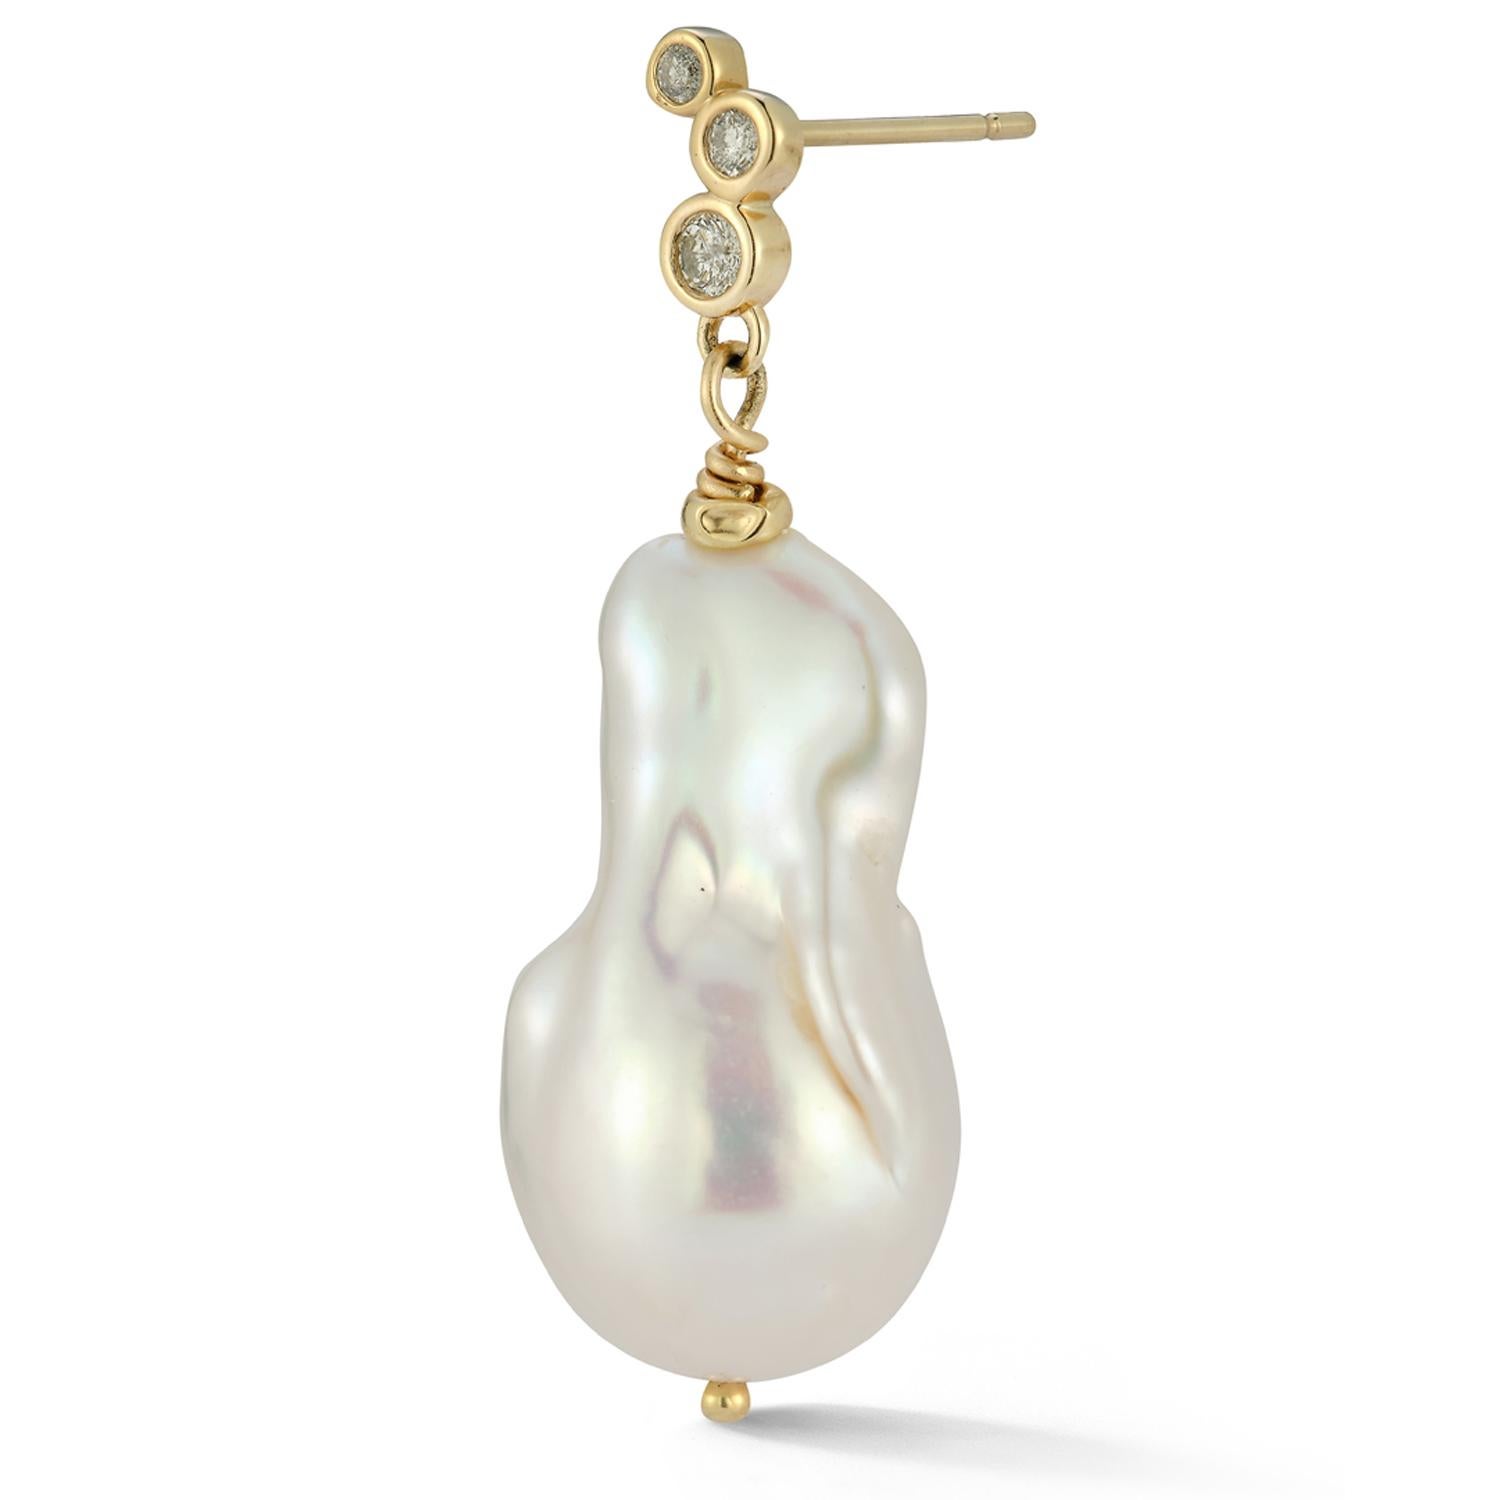 These Left and Right large Baroque pearl drop earrings with Salt and Pepper diamond studs complement each other between the warm tones from the diamonds and the lustrous white pearls. An effortless way to make a statement for any occasion in the